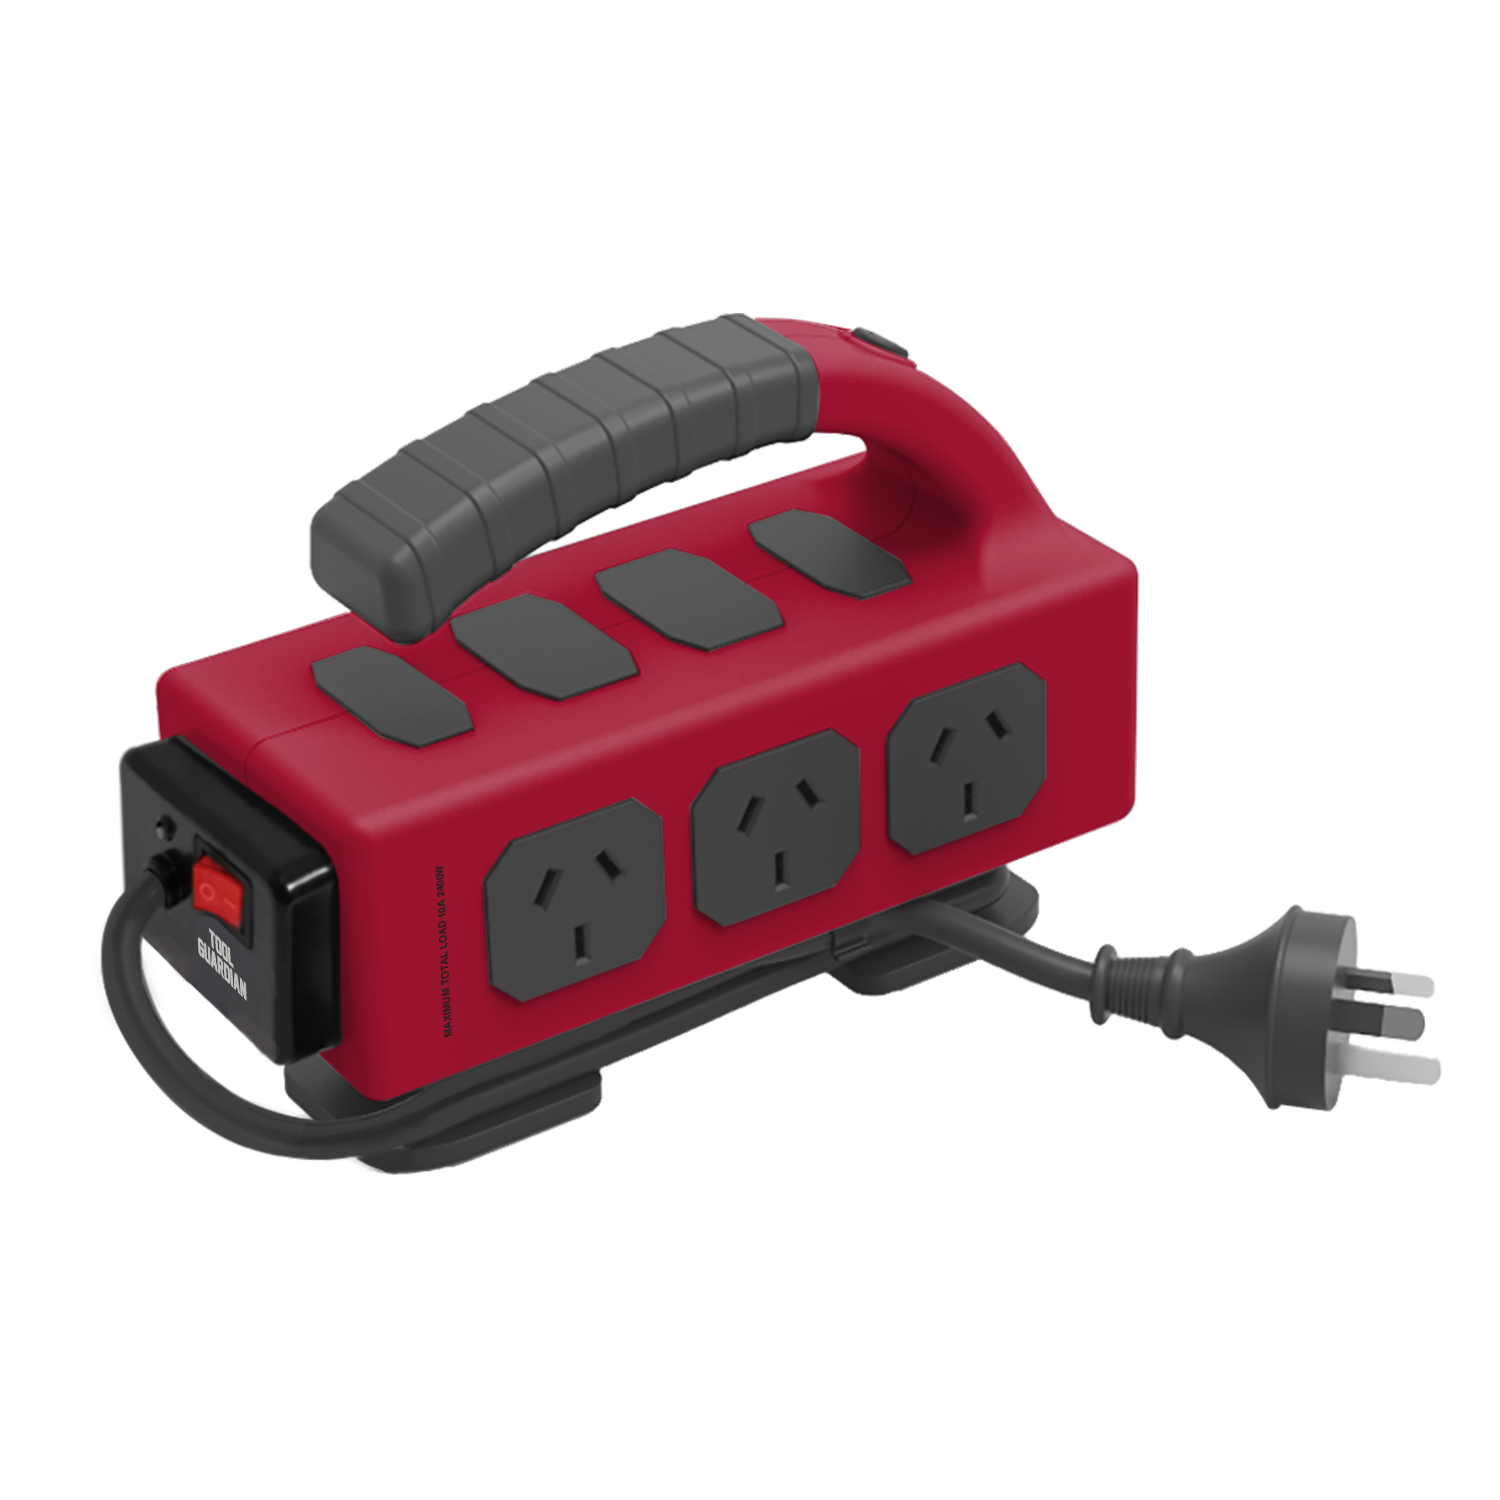 Tool Guardian 5 Socket Power Board with Worklight and USB Charging - Red